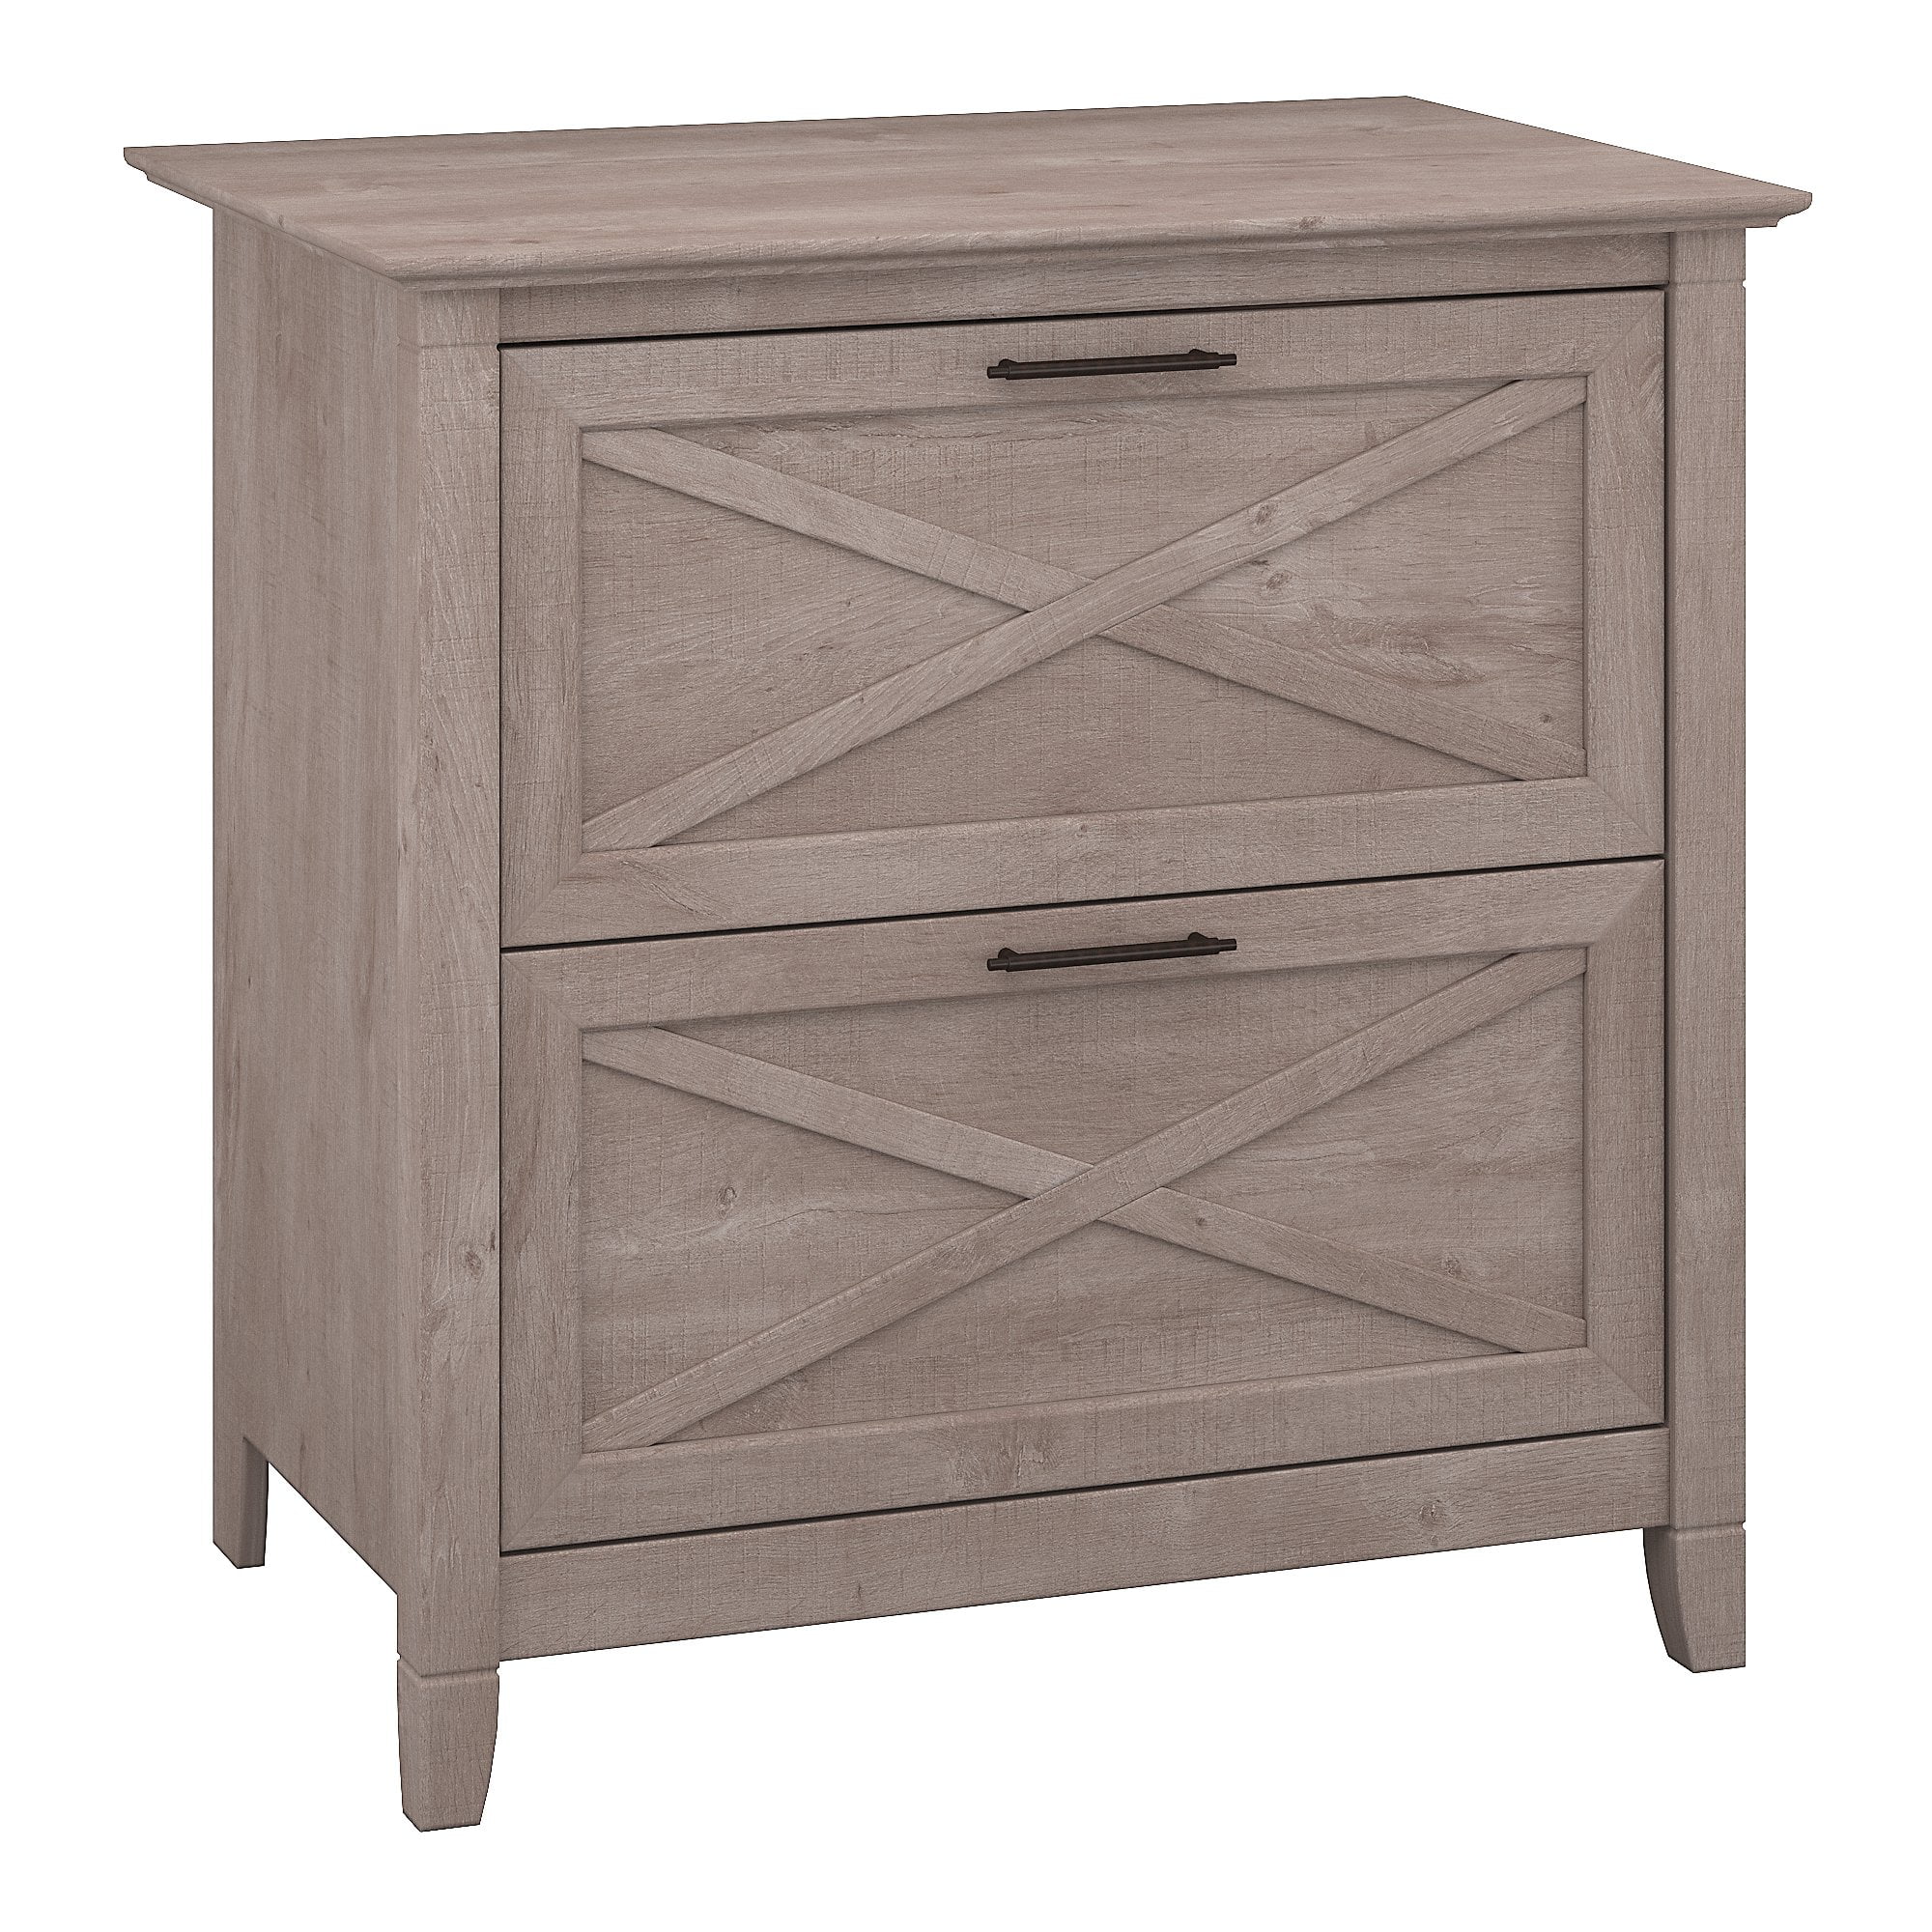 Photo 1 of 2 Drawer Key West File Cabinet Washed Gray - Bush Furniture
//PREVIOUSLY OPEN //COSMETIC DAMAGE //LOOSED HARDWARE 